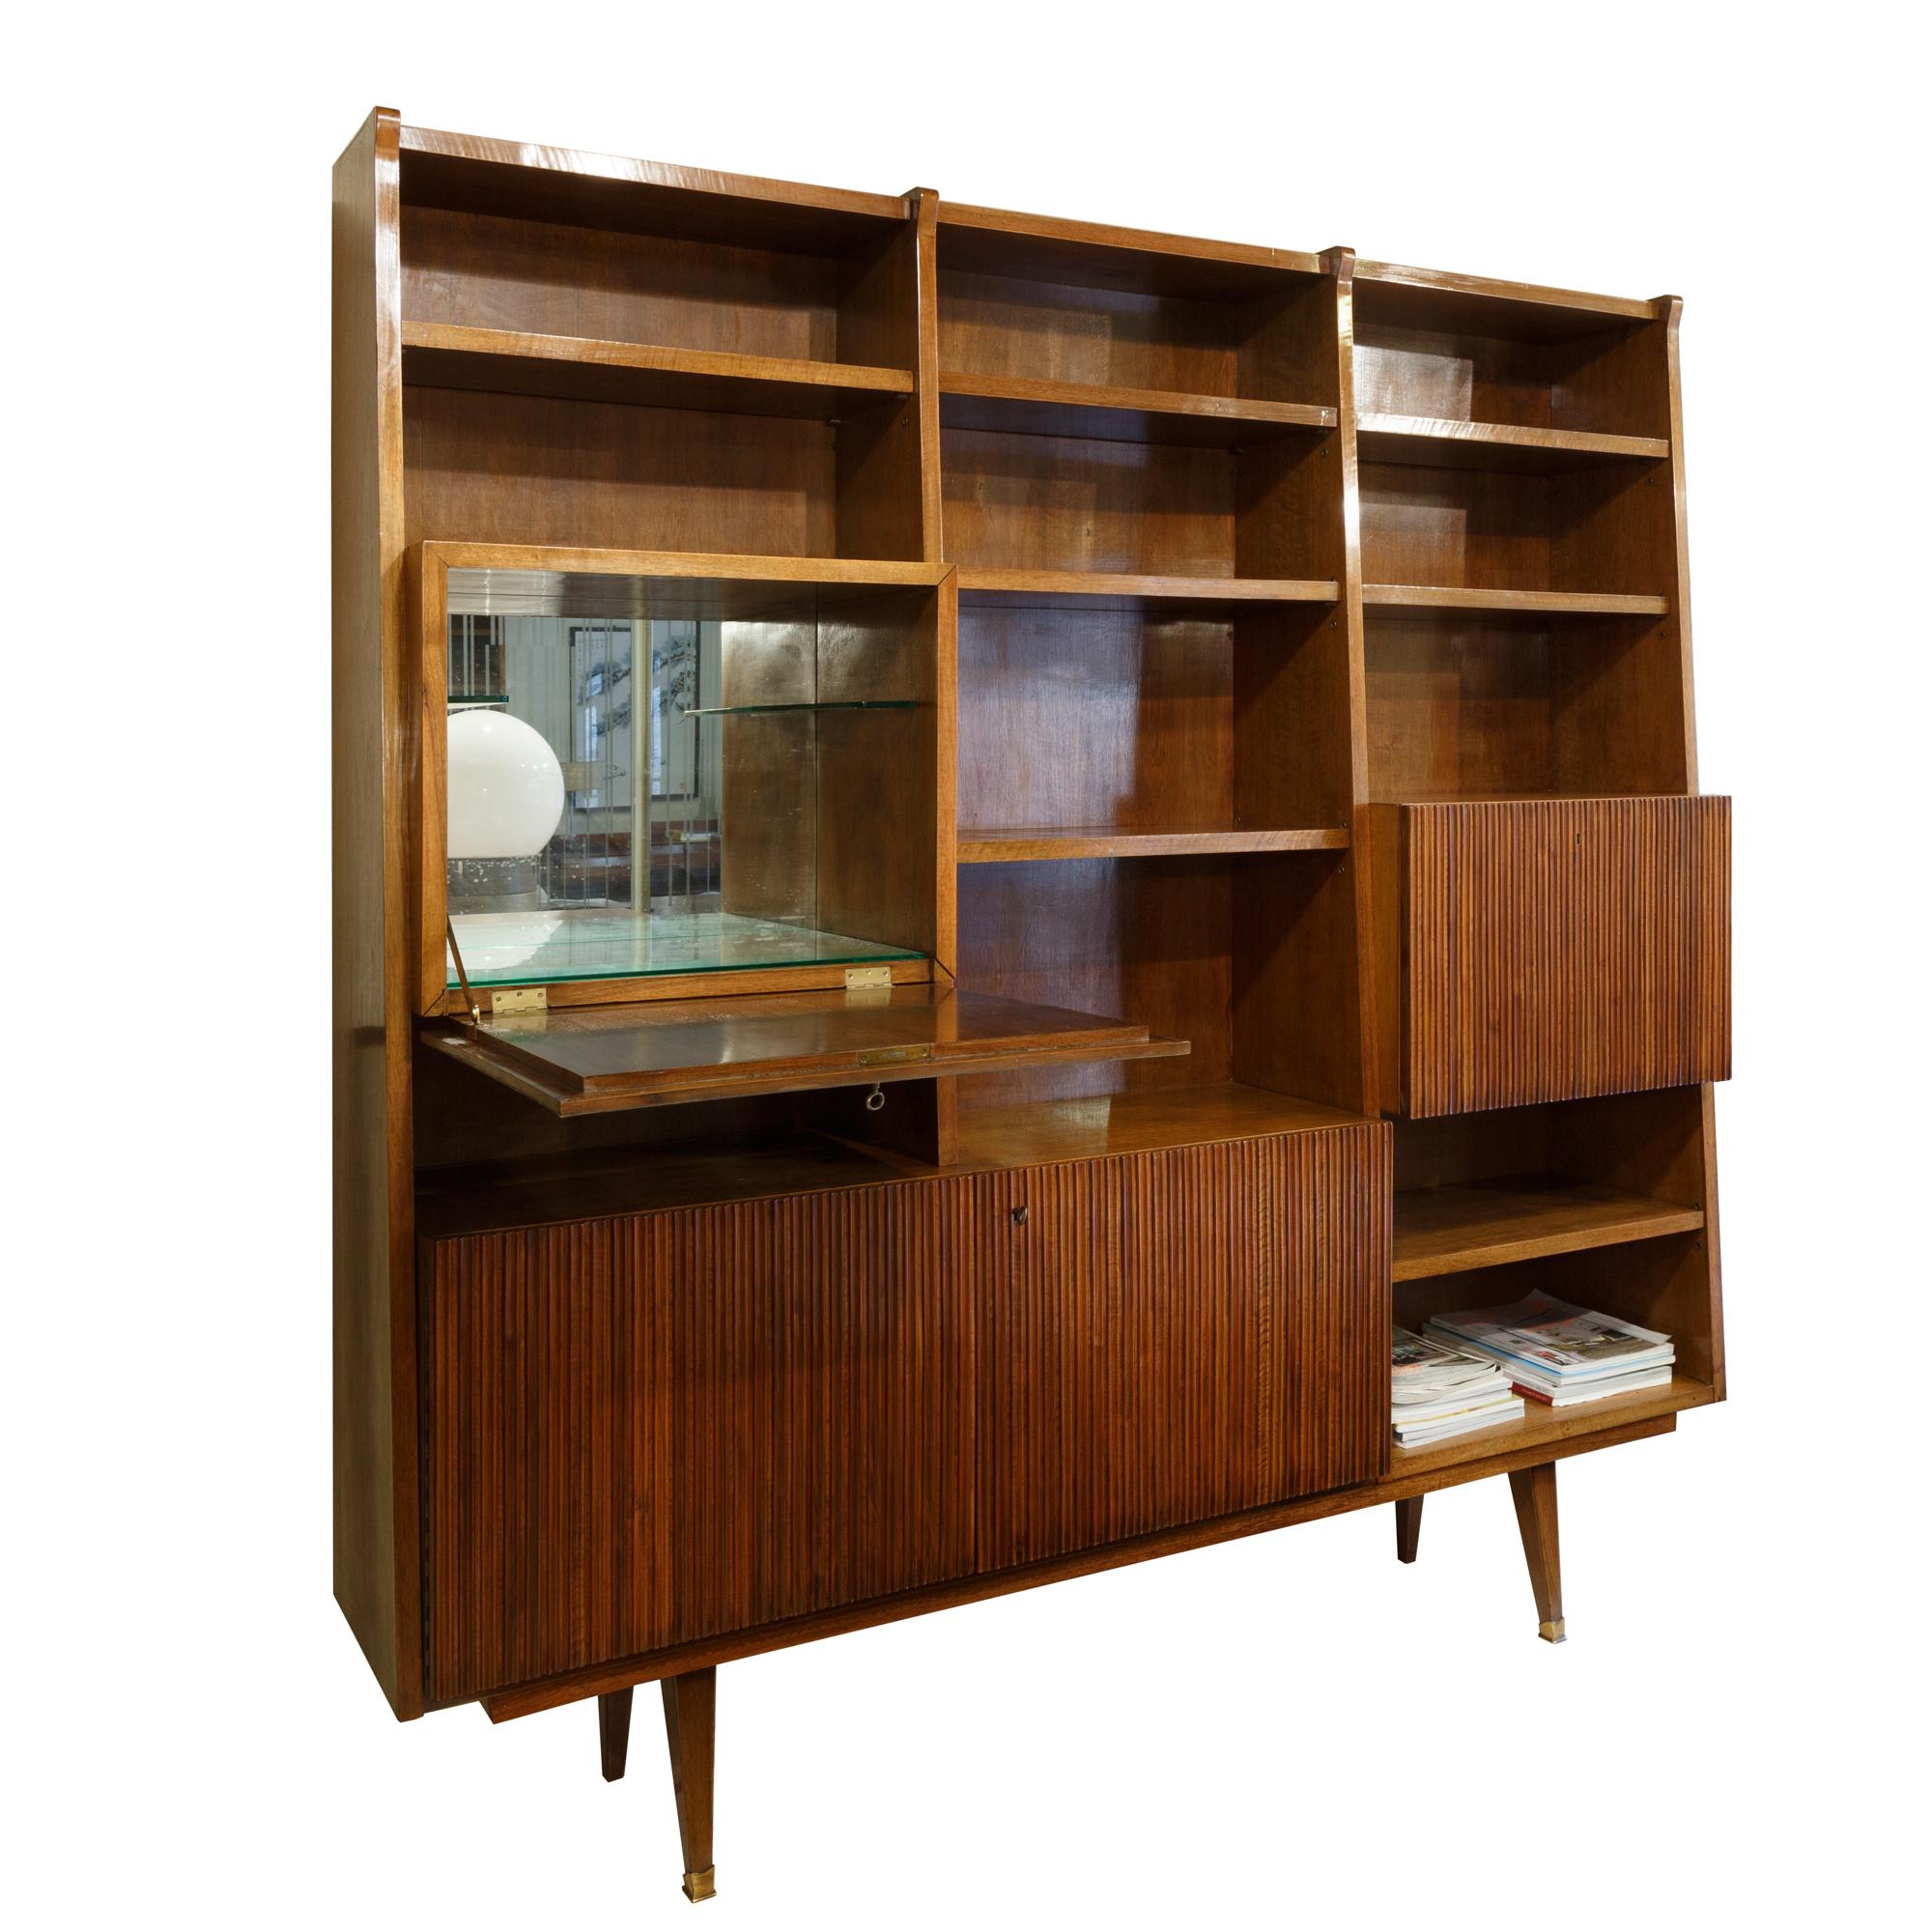 Bookcase and writing desk and bar area in grissinato walnut wood, in style Gio Ponti, Italy 1950s, Mid-Century Modern.
The door that opens the pretty bar, which inside is finished in mirror, the door is in parchment and has original metaphysical